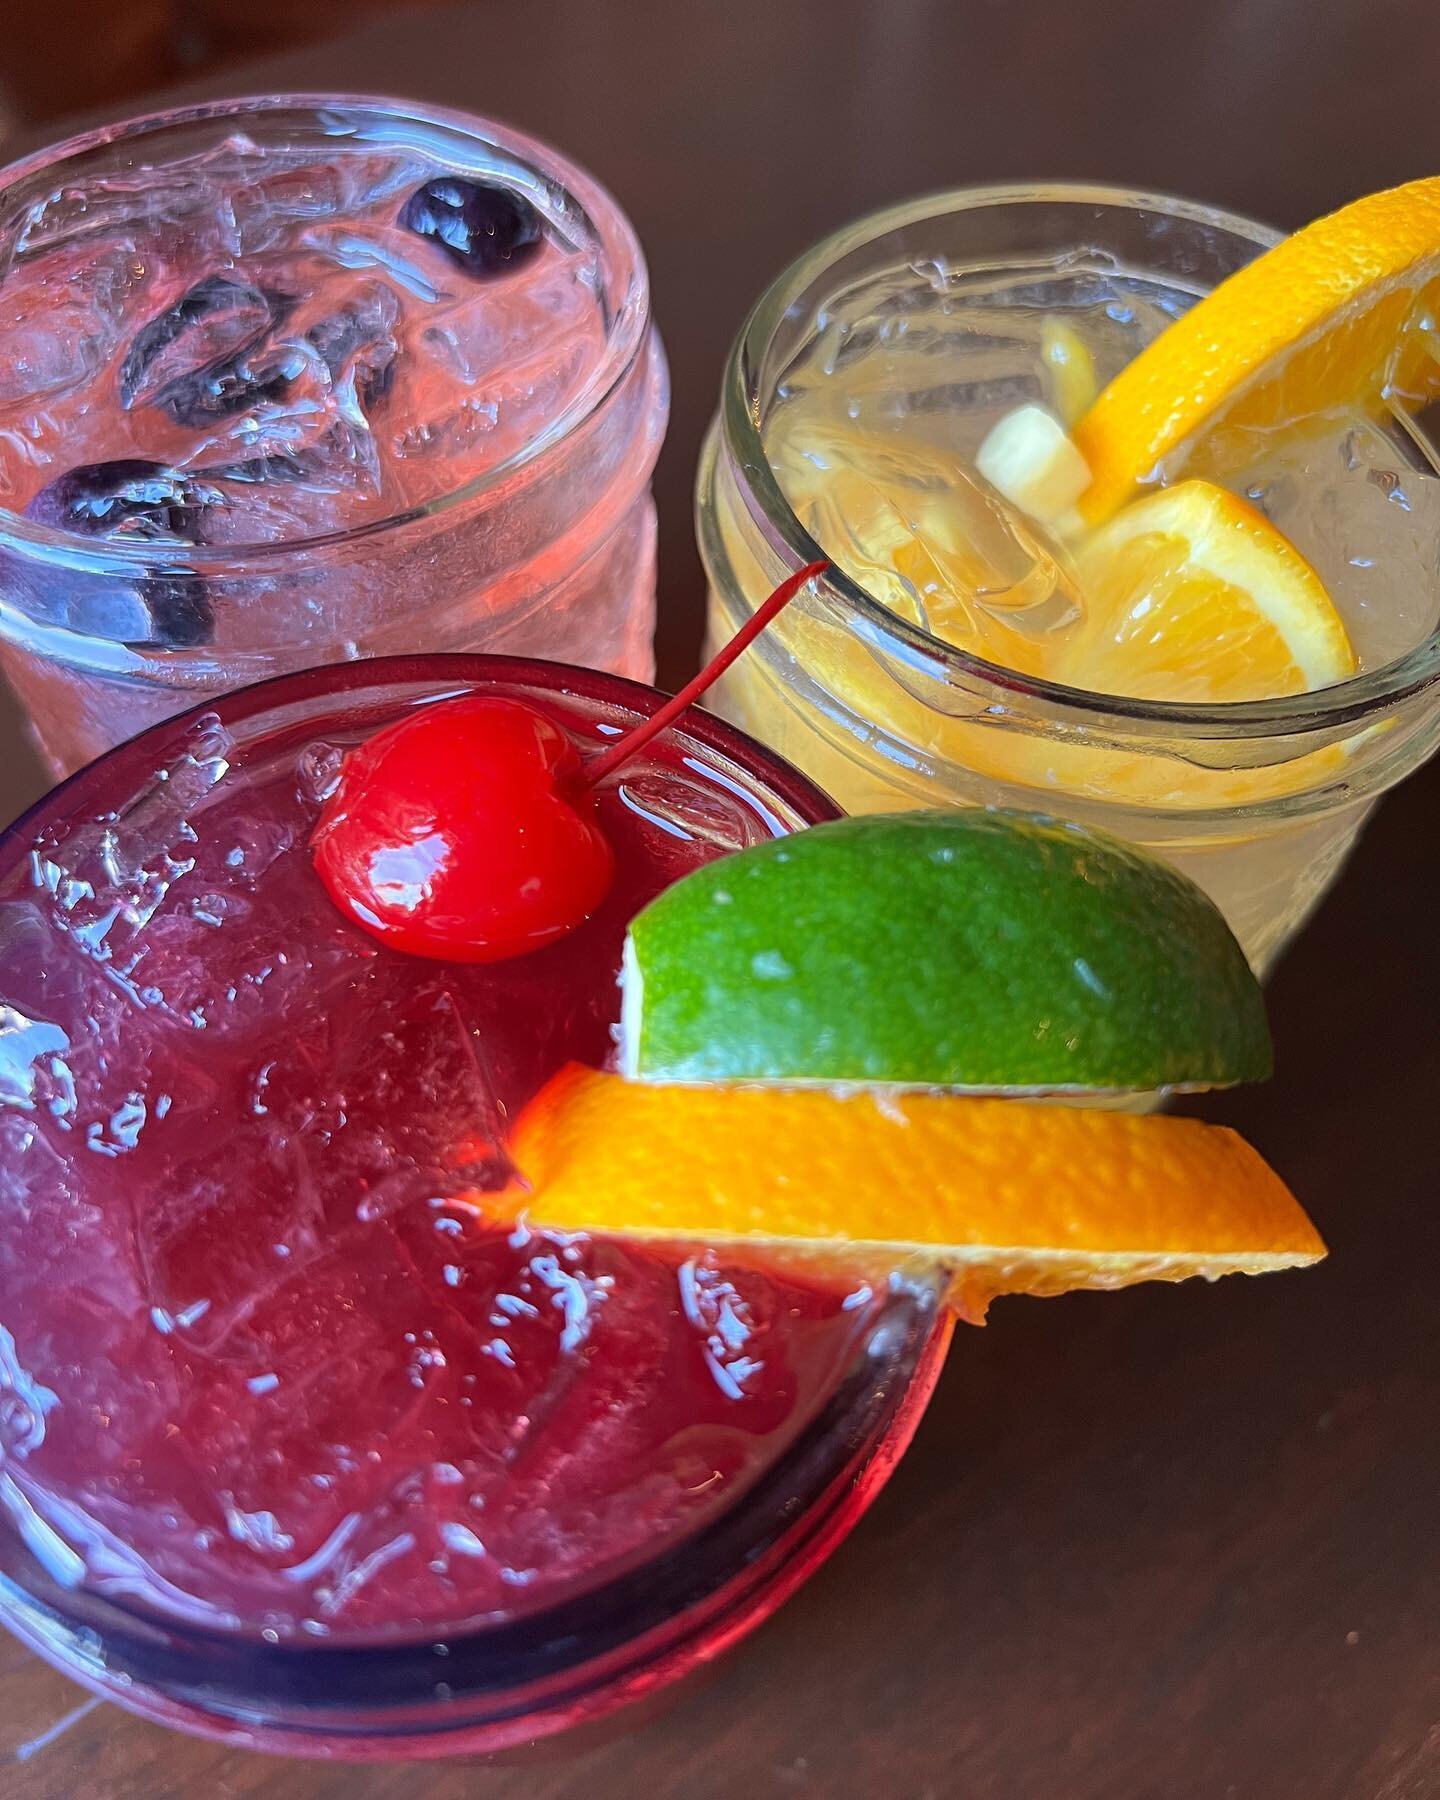 This weather calls for skippin&rsquo; out of work early! It&rsquo;s officially sangria season☀️🍹 what&rsquo;s your pick: peach mango, mixed berry, or classic highland?